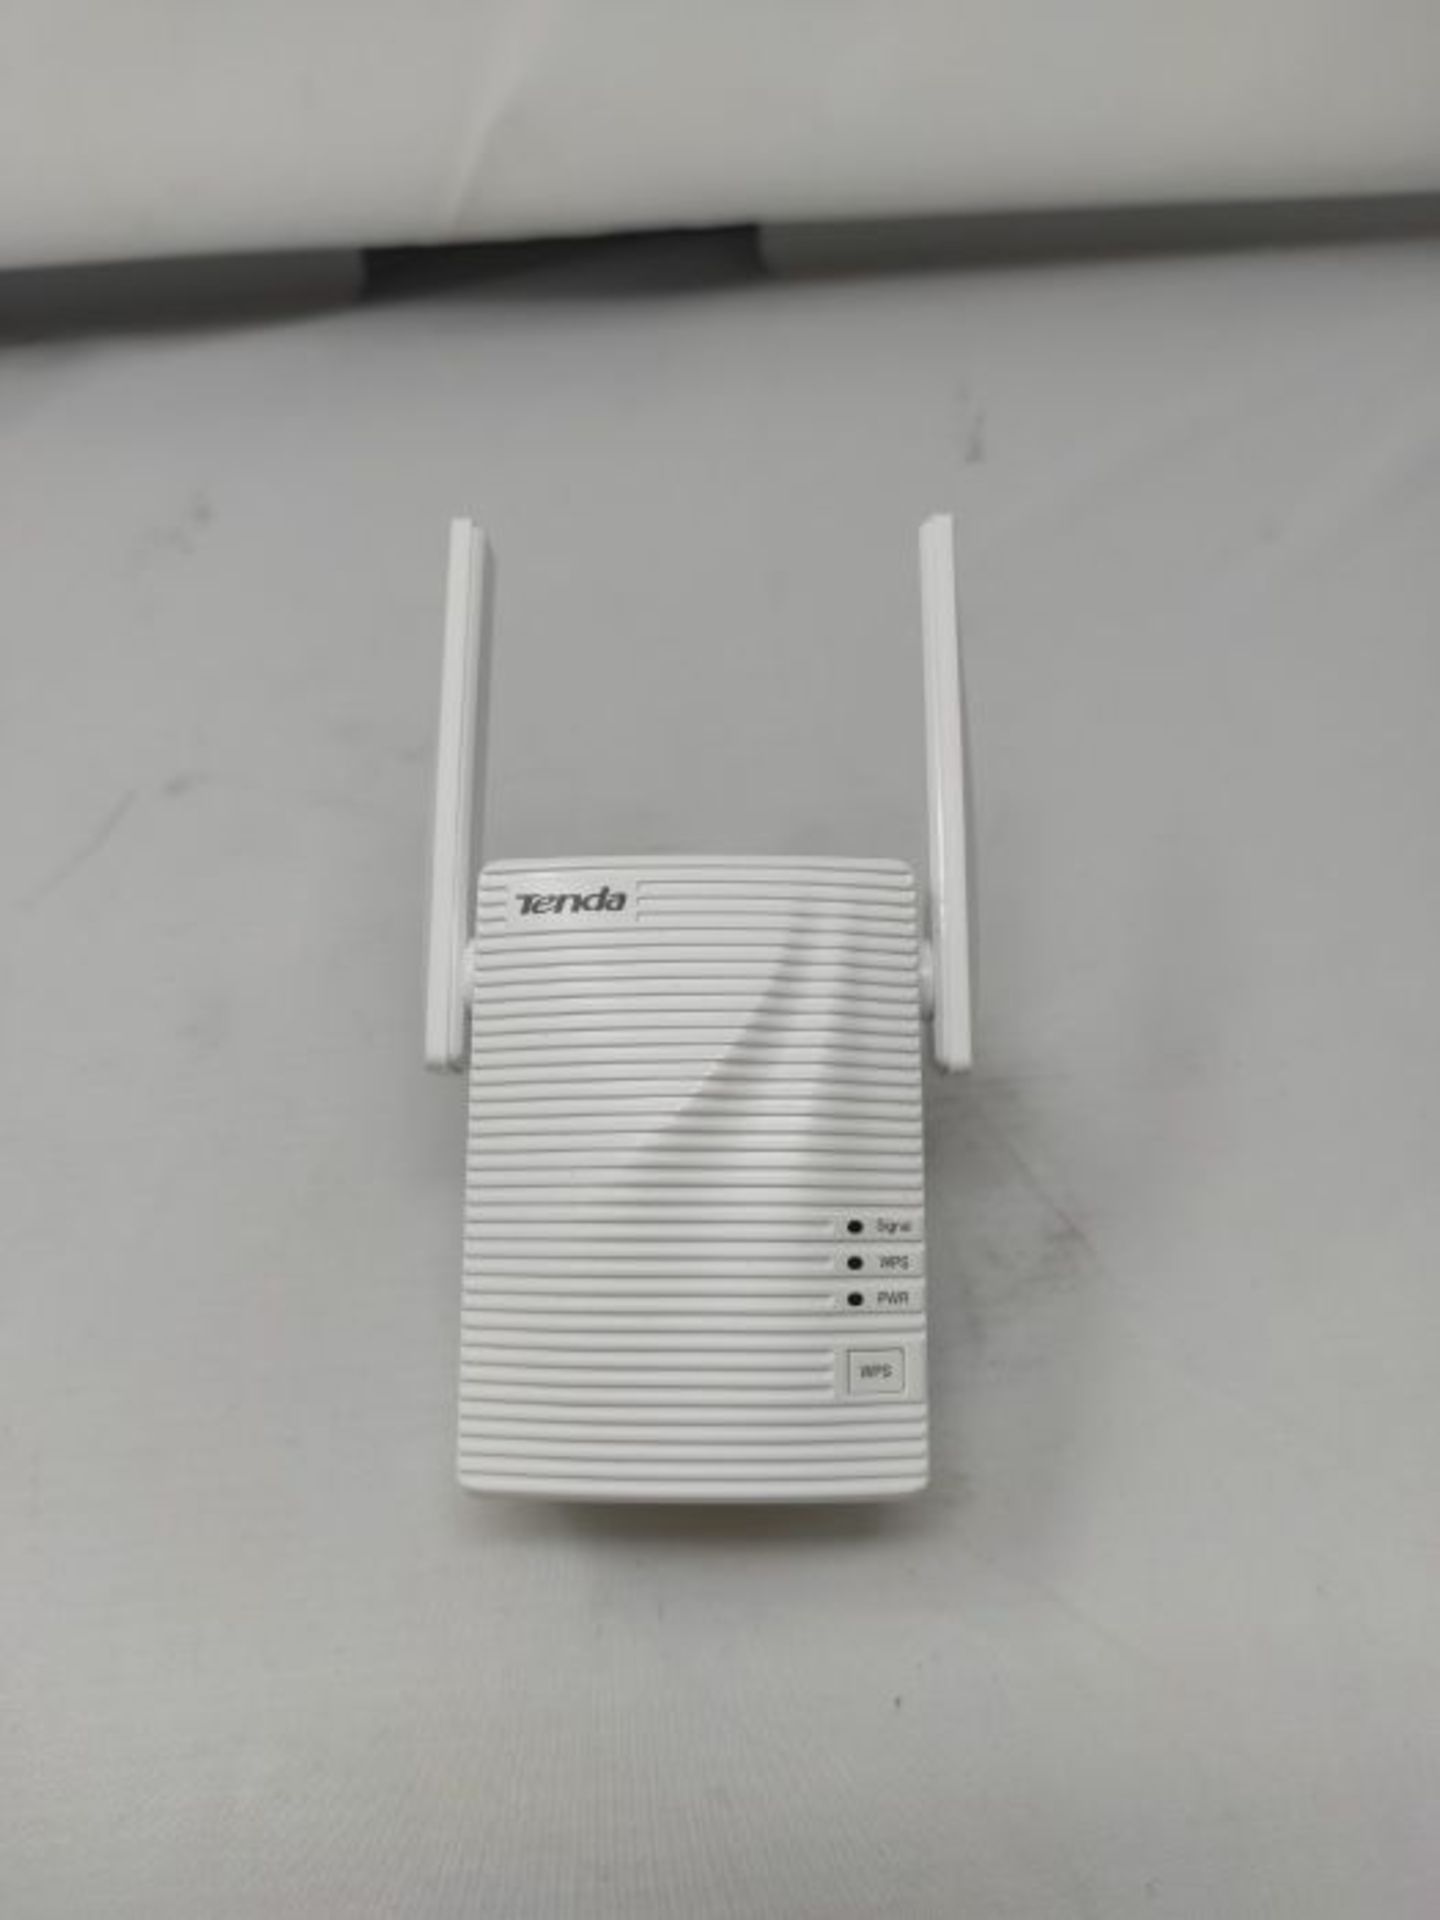 Tenda Repeater 750 MBit/s WiFi Amplifier Extender Booster Signal Network San Double Wi - Image 3 of 3